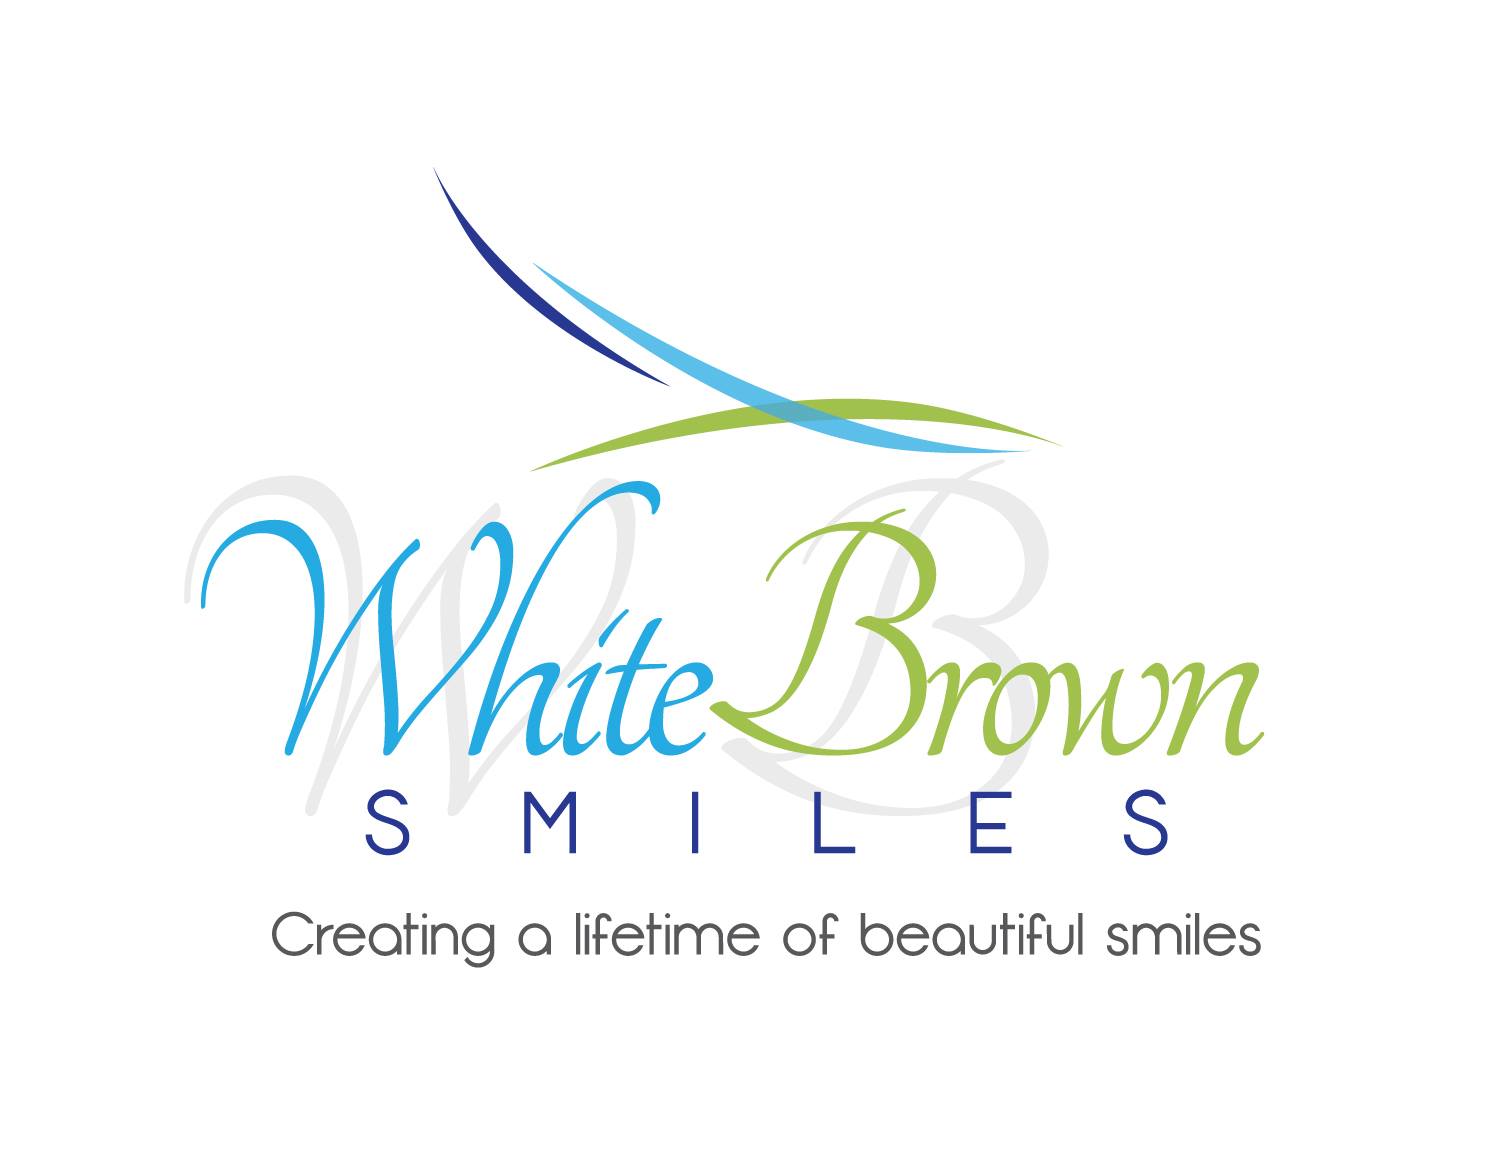 Company logo of White Brown Kerry DDS